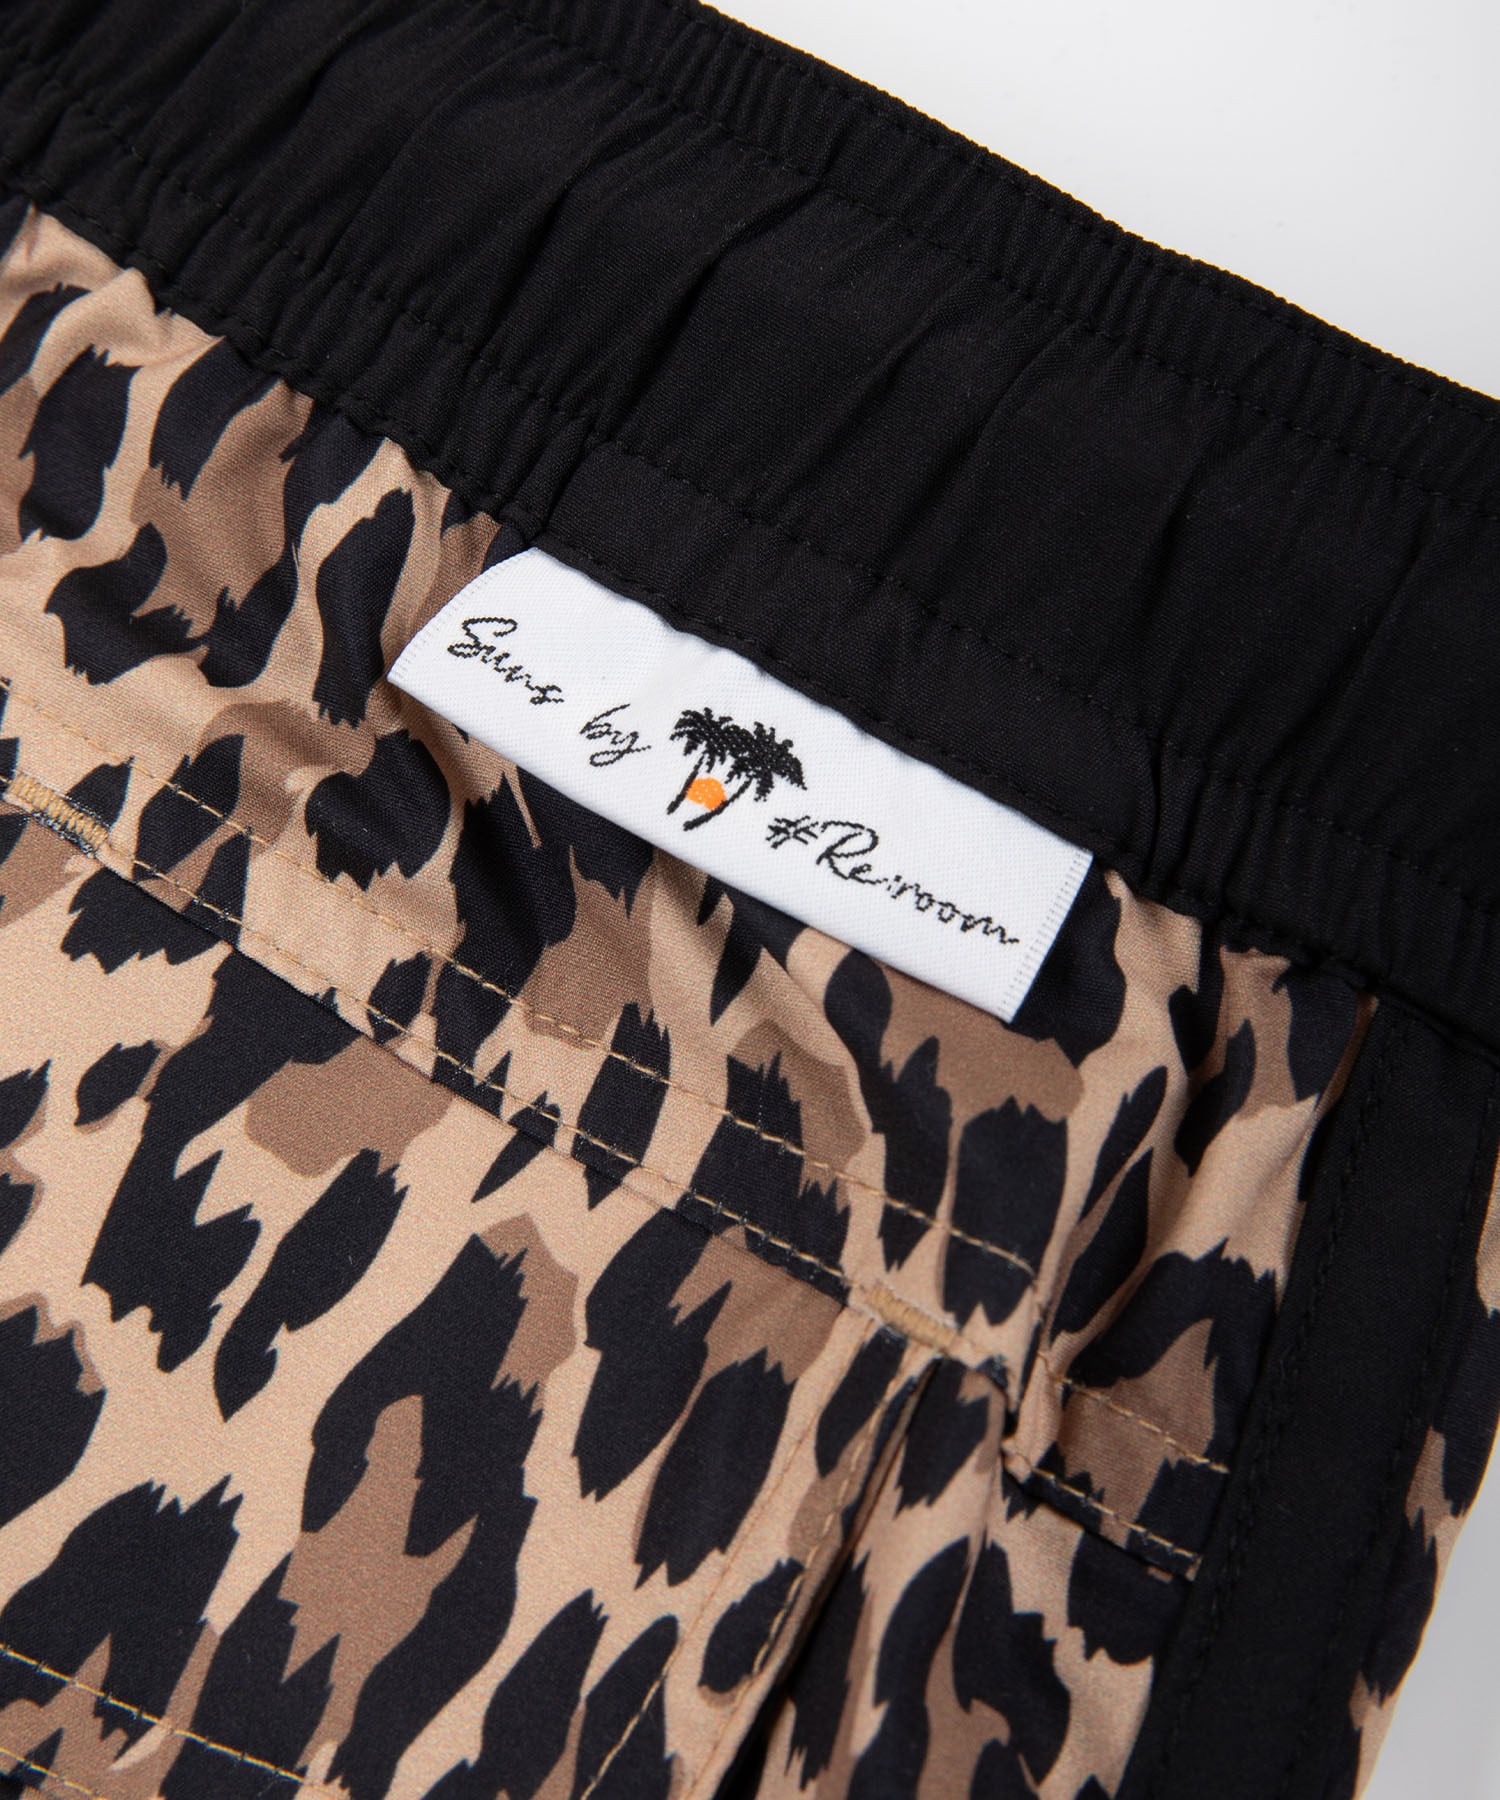 SUNS】LEOPARD PIPING BOARDSHORTS［RSW071］ | #Re:room（リルーム）